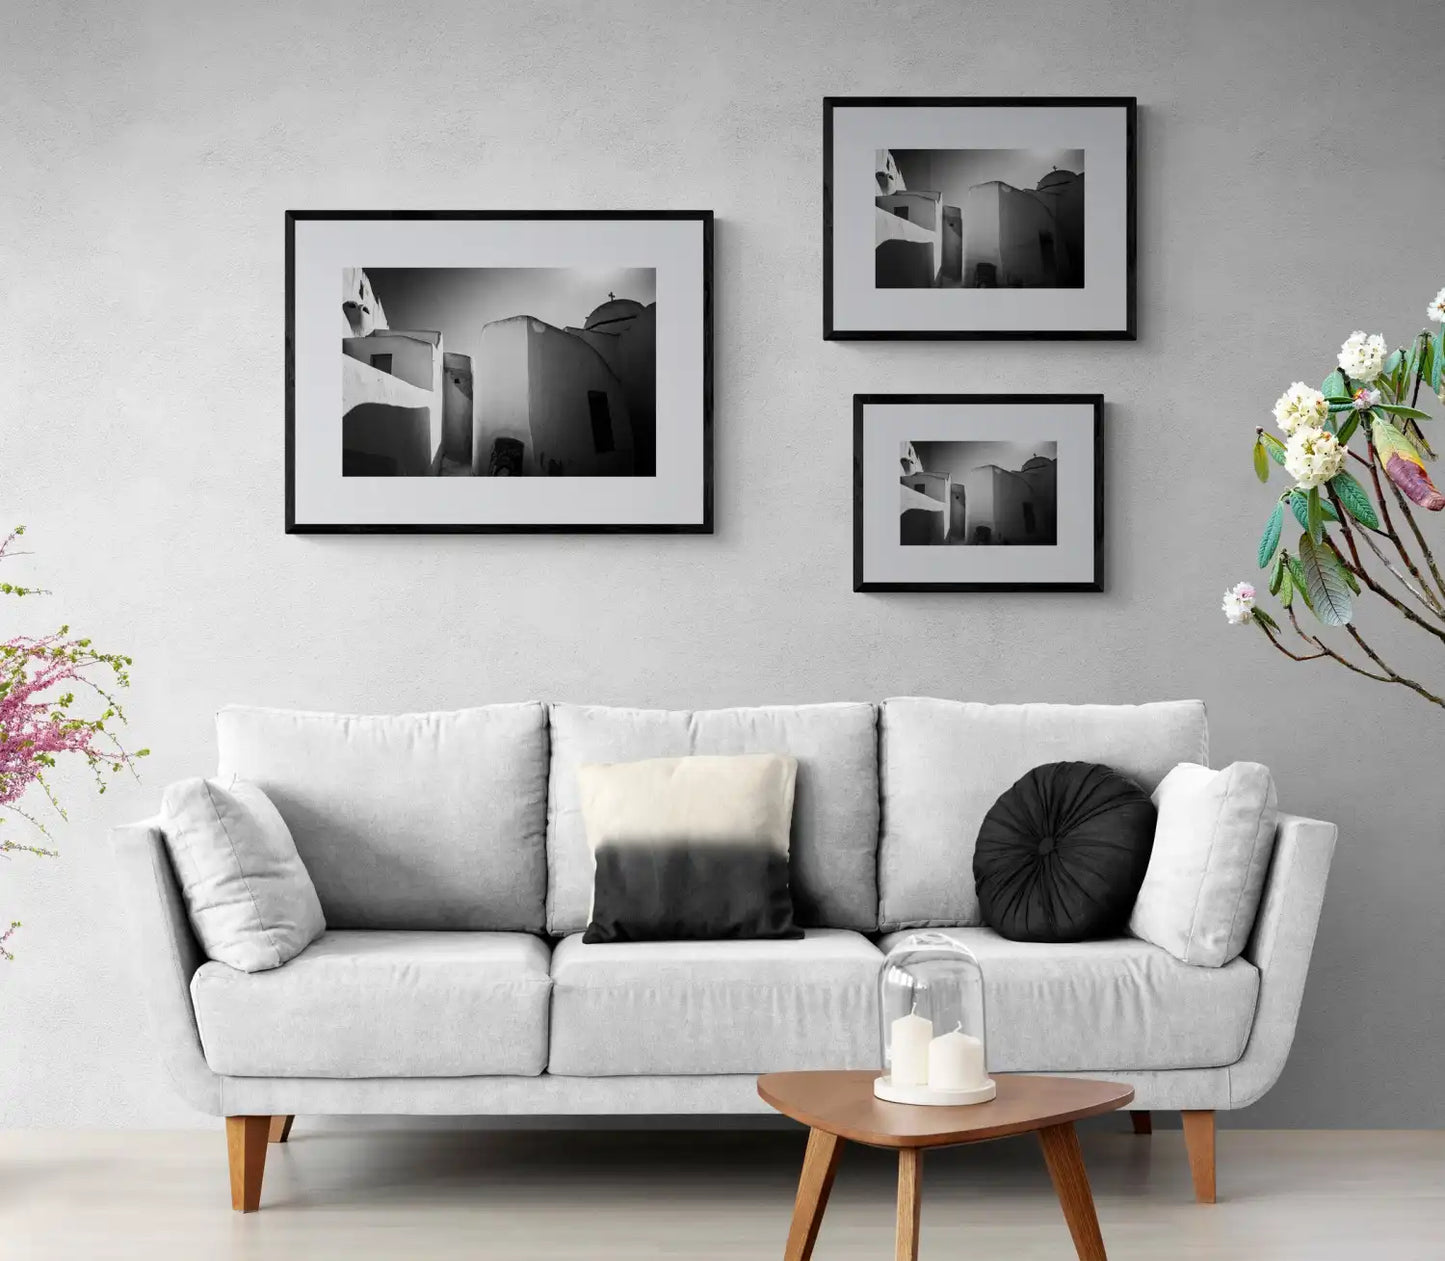 Long Forms at Emporio | Santorini | Chorōs | Black-and-white wall art photography from Greece - framing options